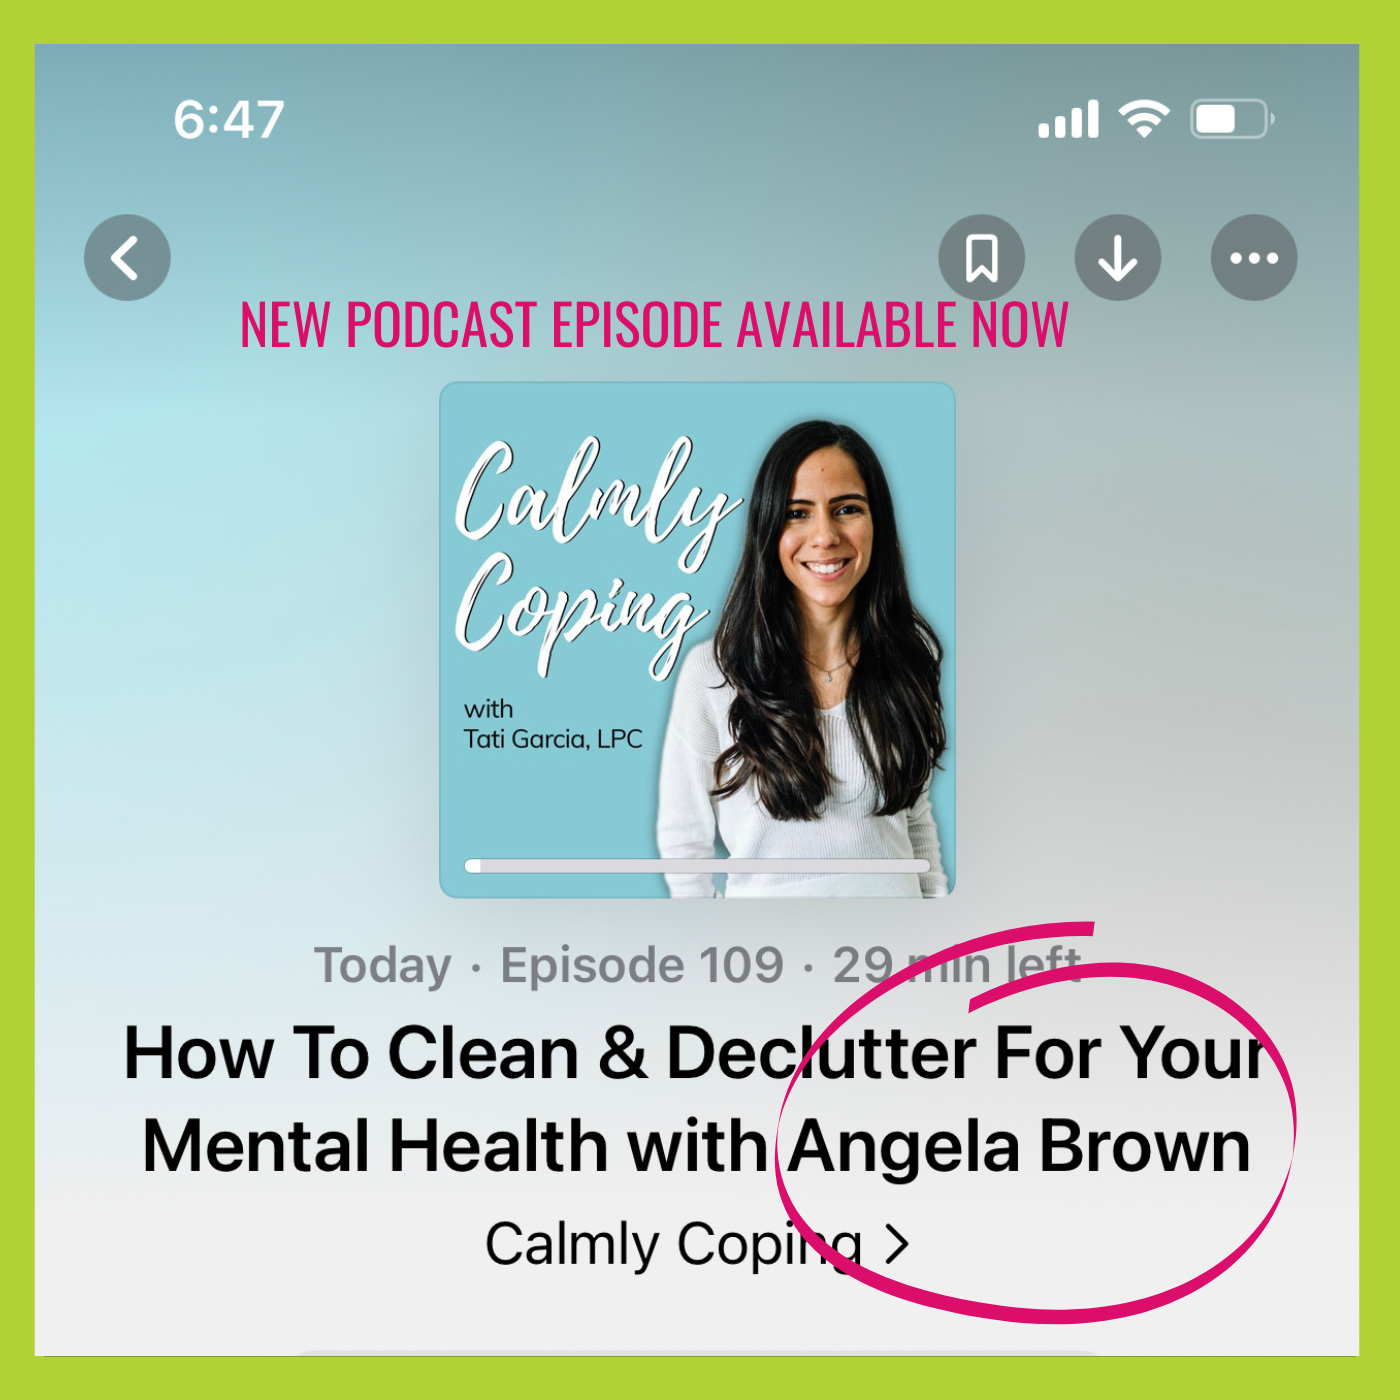 Angela Brown Interviewed on the Calmly Coping Podcast with Tati Garcia